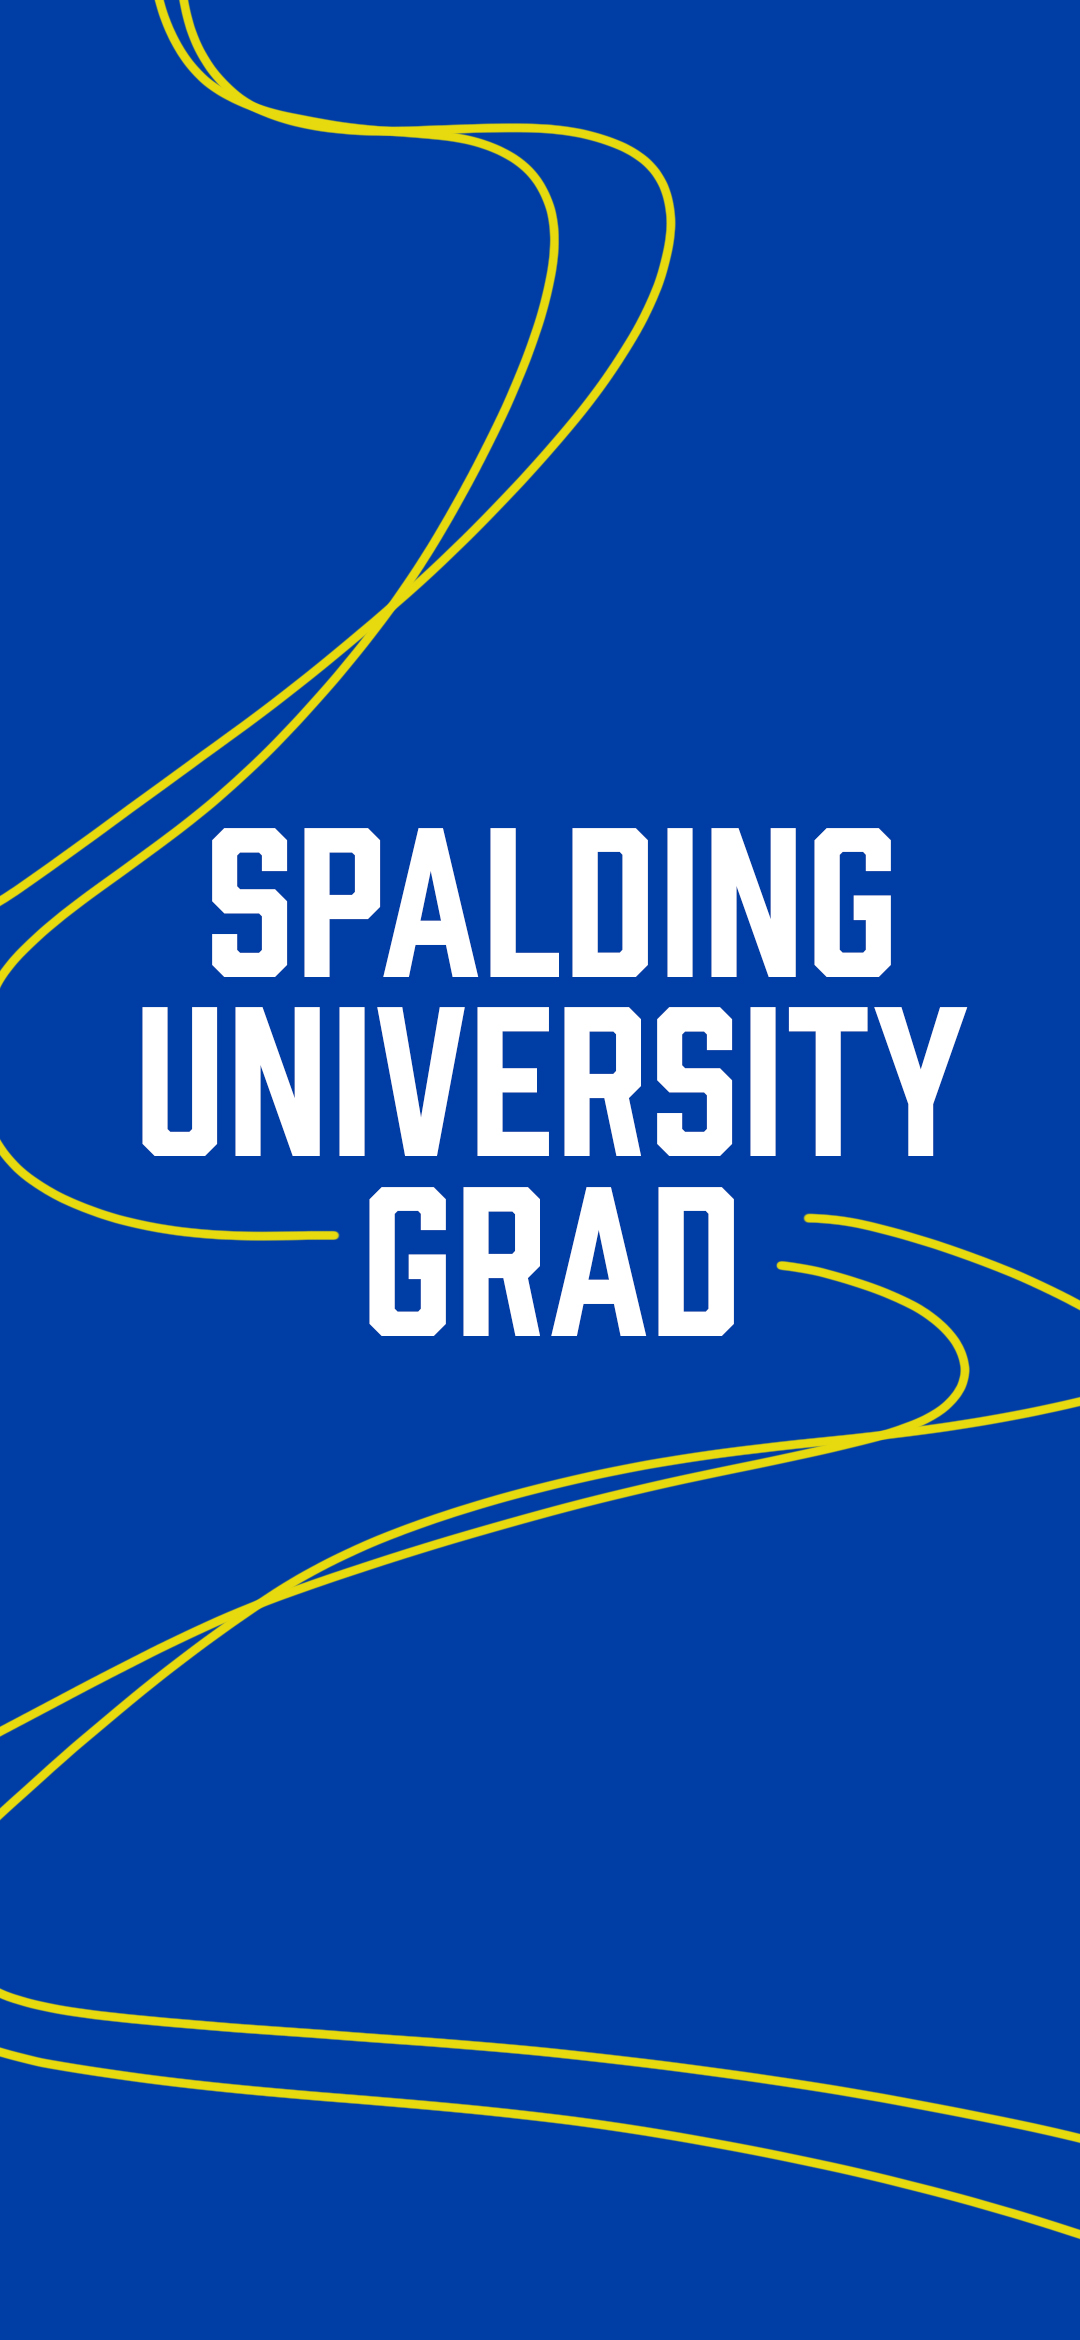 Spalding University graduate wallpaper, blue background with yellow wavy line and white text